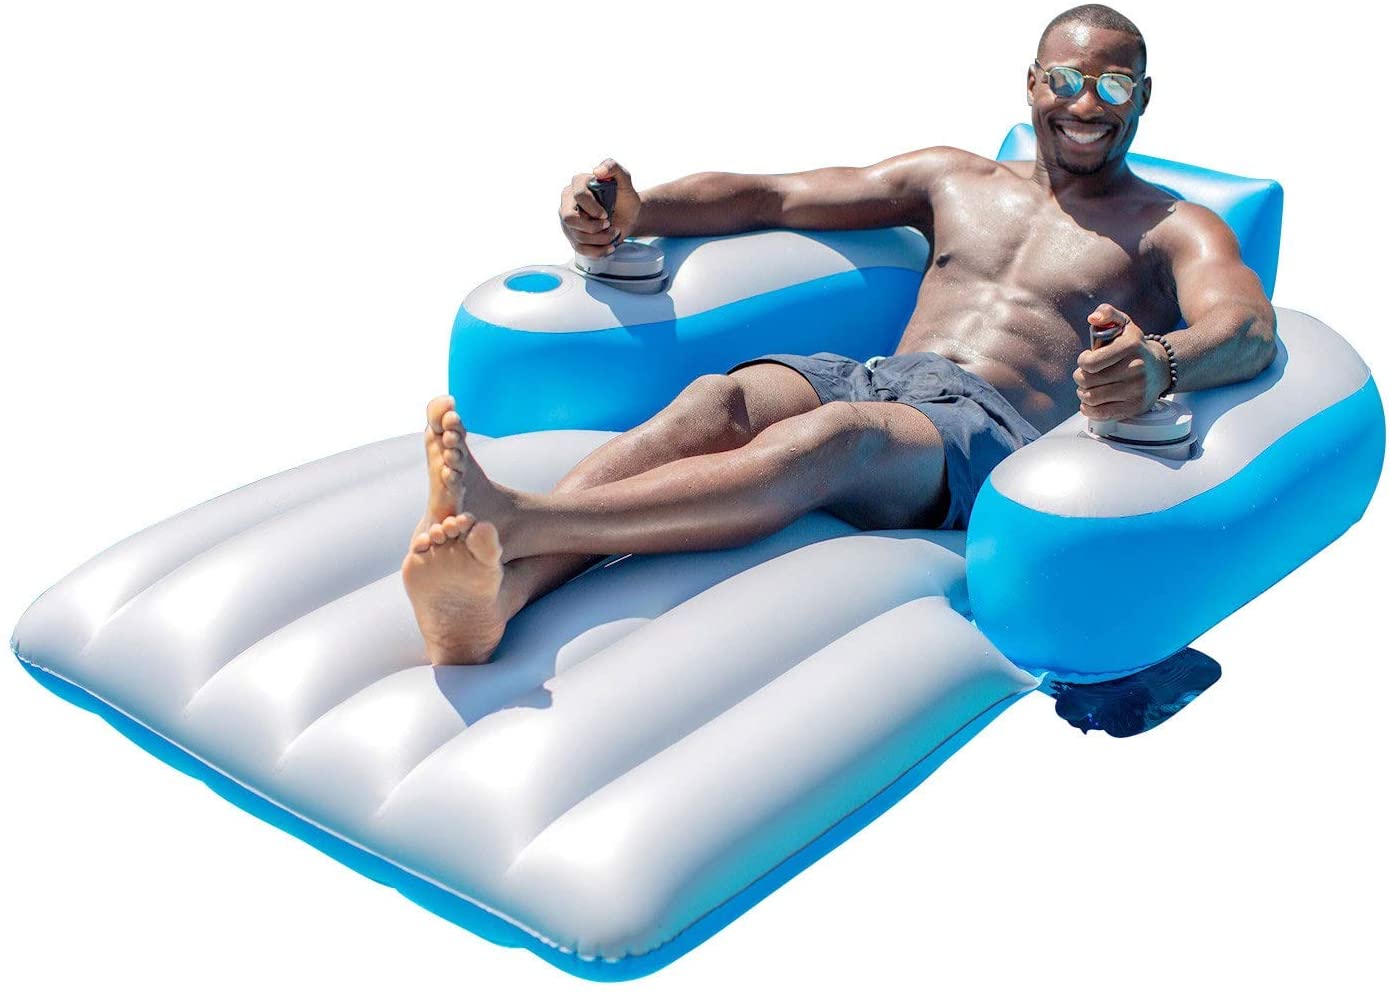 The 17 Best Pool Toys and Floats for an Pool Party